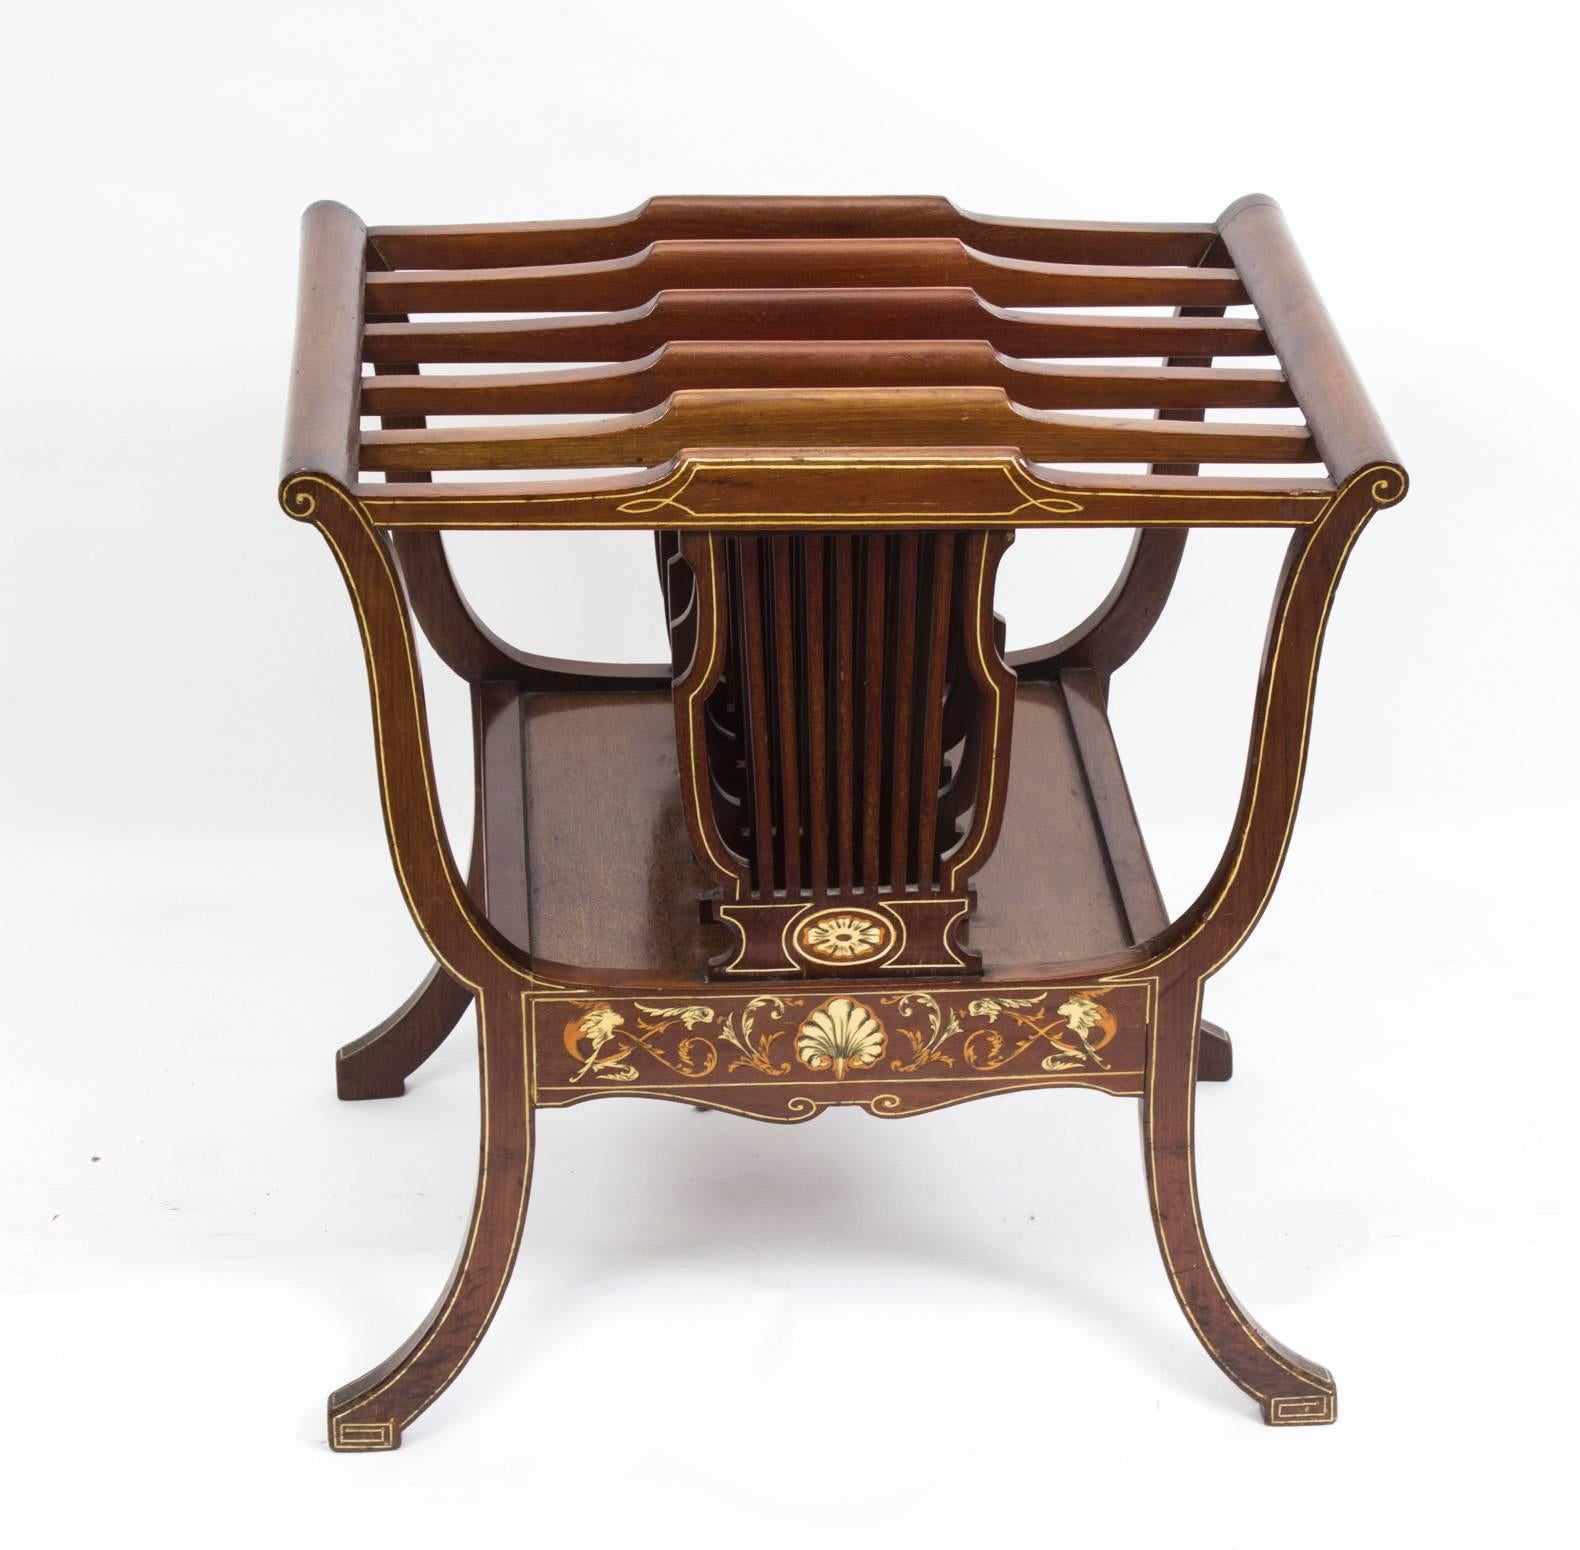 This is a gorgeous antique Edwardian mahogany Canterbury of lyre form with fabulous inlaid decoration, circa 1890 in date. 

It is beautifully oultined with stringing and scrolling foliate motifs, has five lyre shaped divisions and stands on elegant